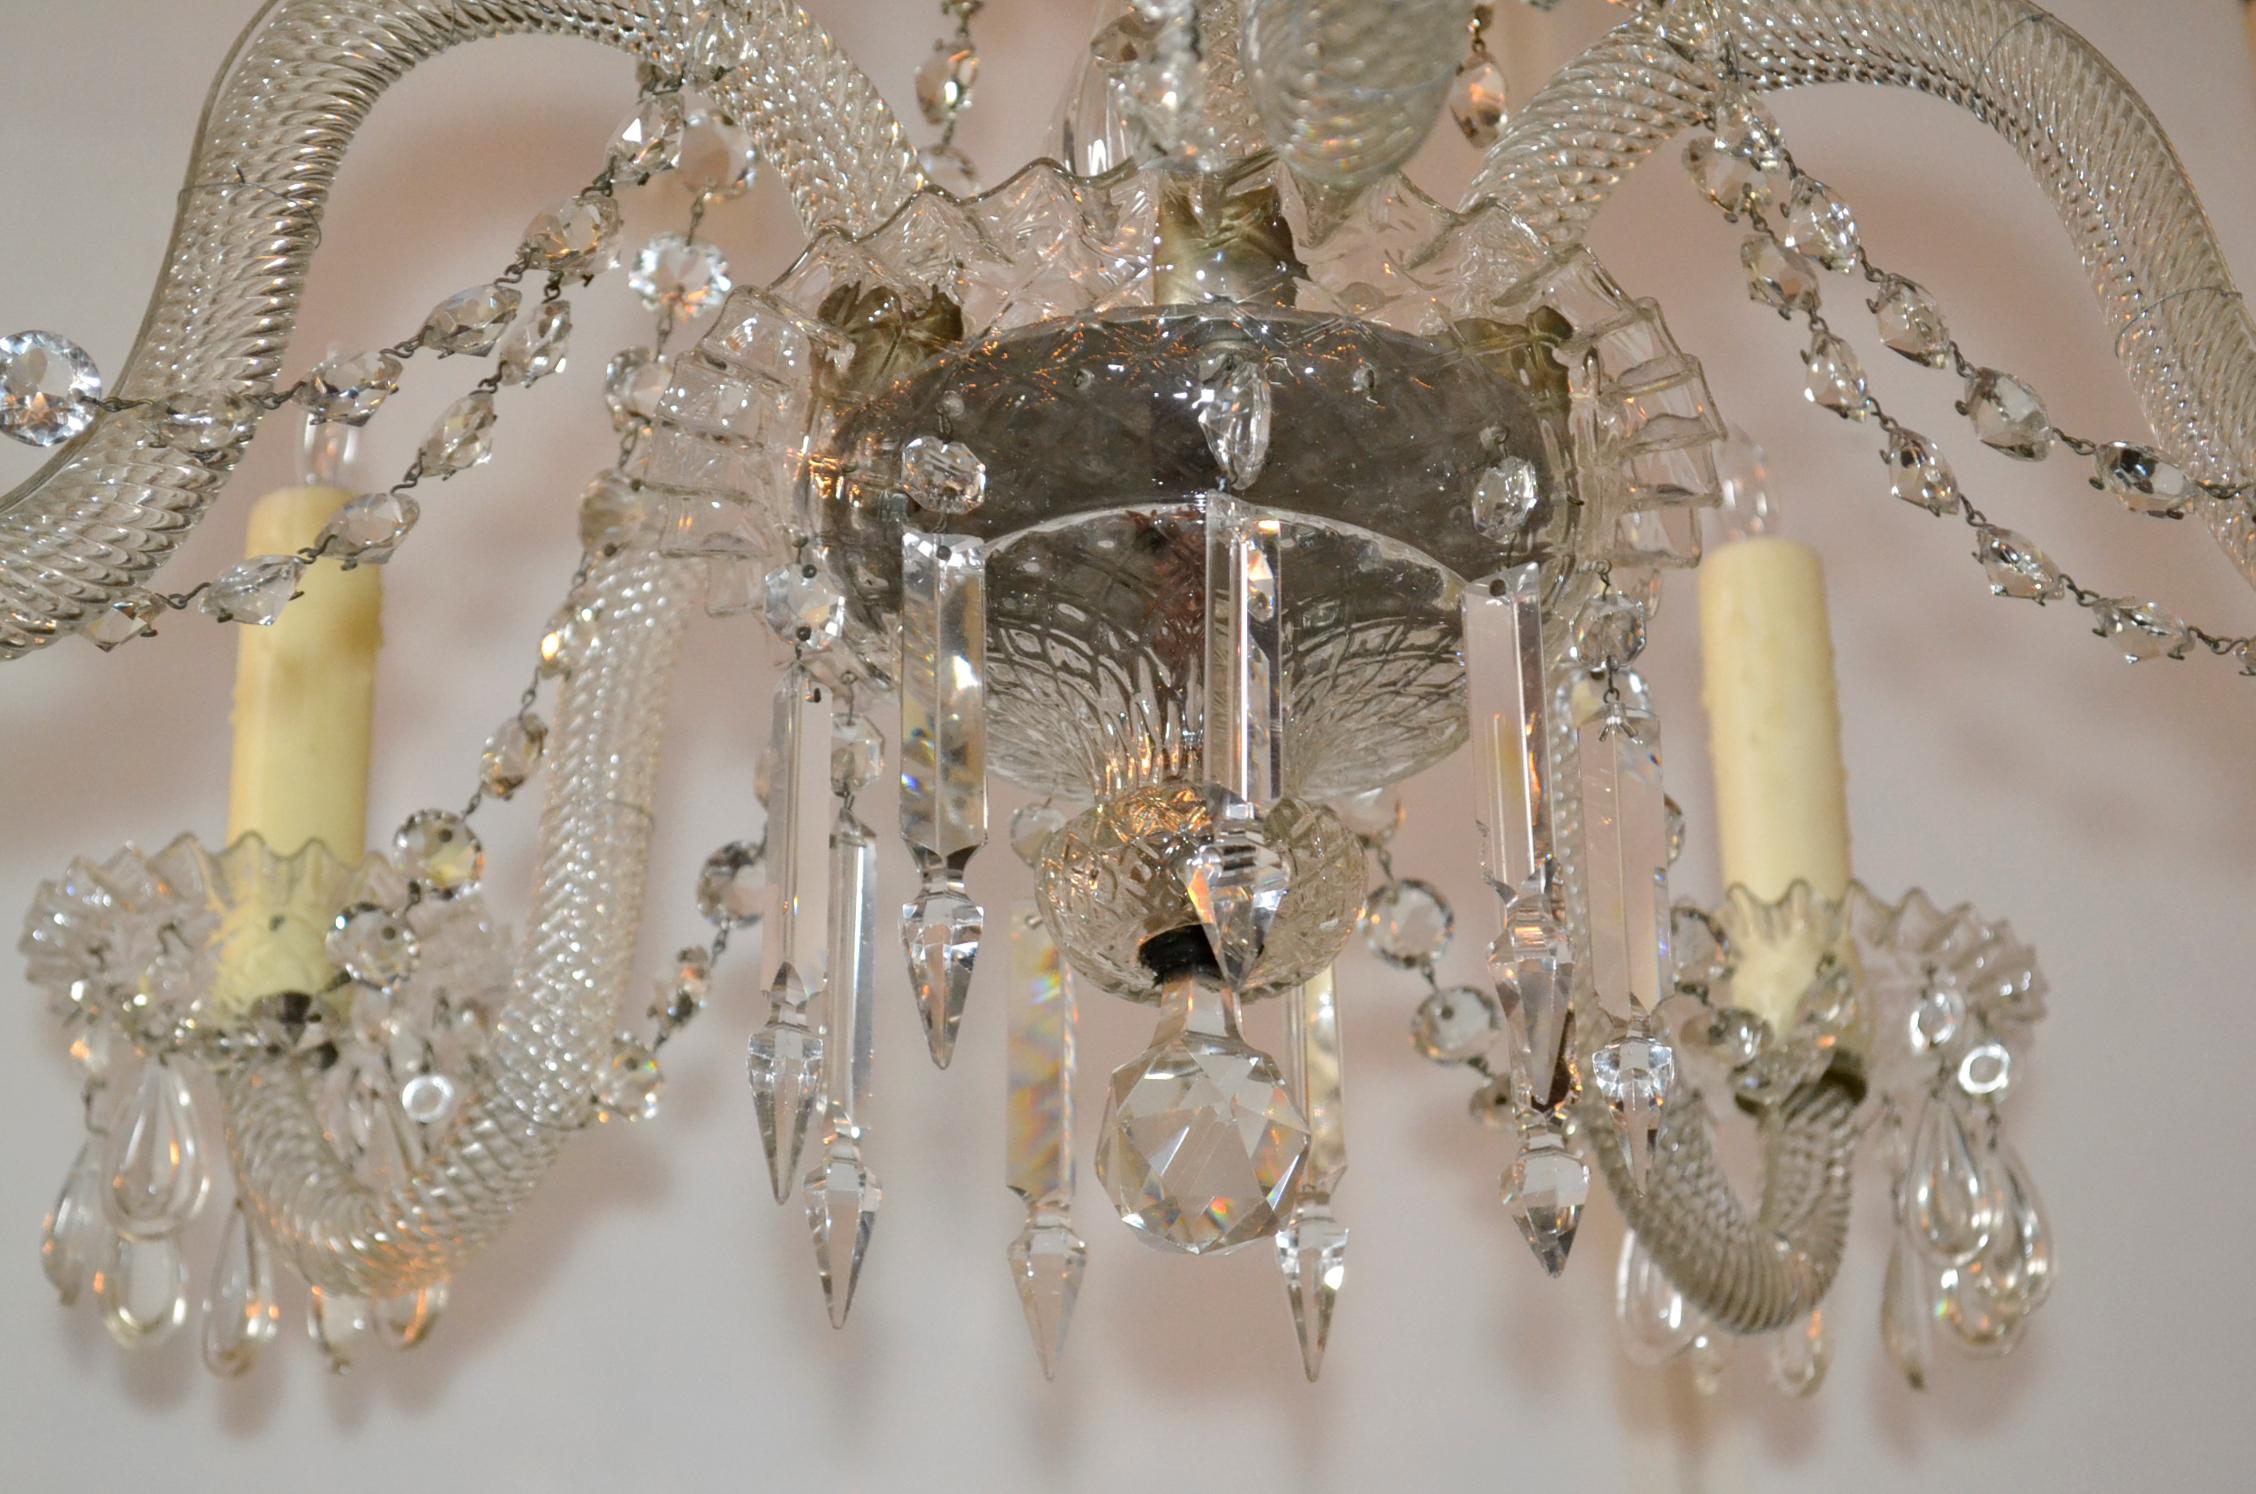 Rare 19th century fine quality baccarat style crystal and glass 5-light chandelier.  Very likely Baccarat although we do not see any marks.   Exceptional quality and detail.  Cleaned and restored and ready to hang!